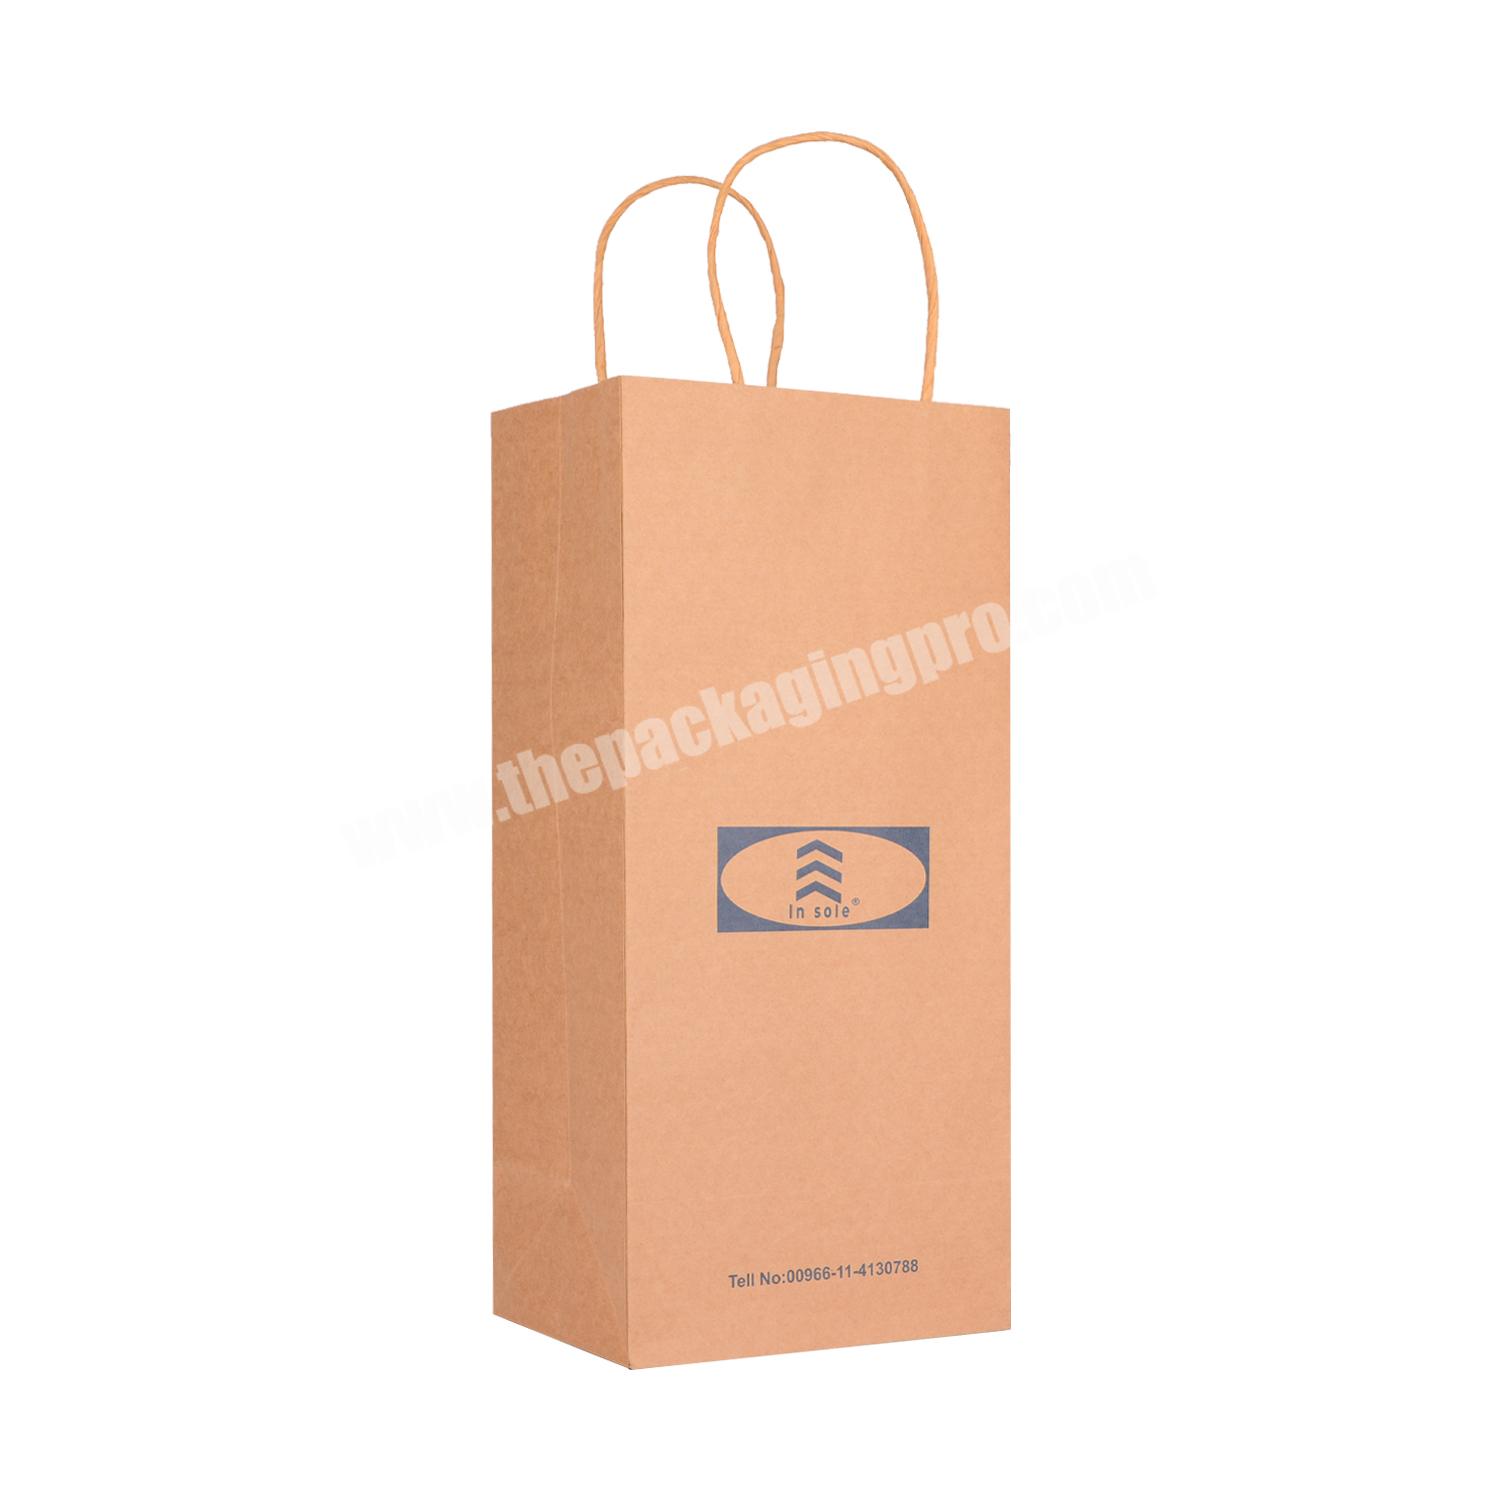 Recyclable Wide Base Brown Kraft Paper Gusset Bag Eco Boutique Shopping Paper Bag With Your Own Logo